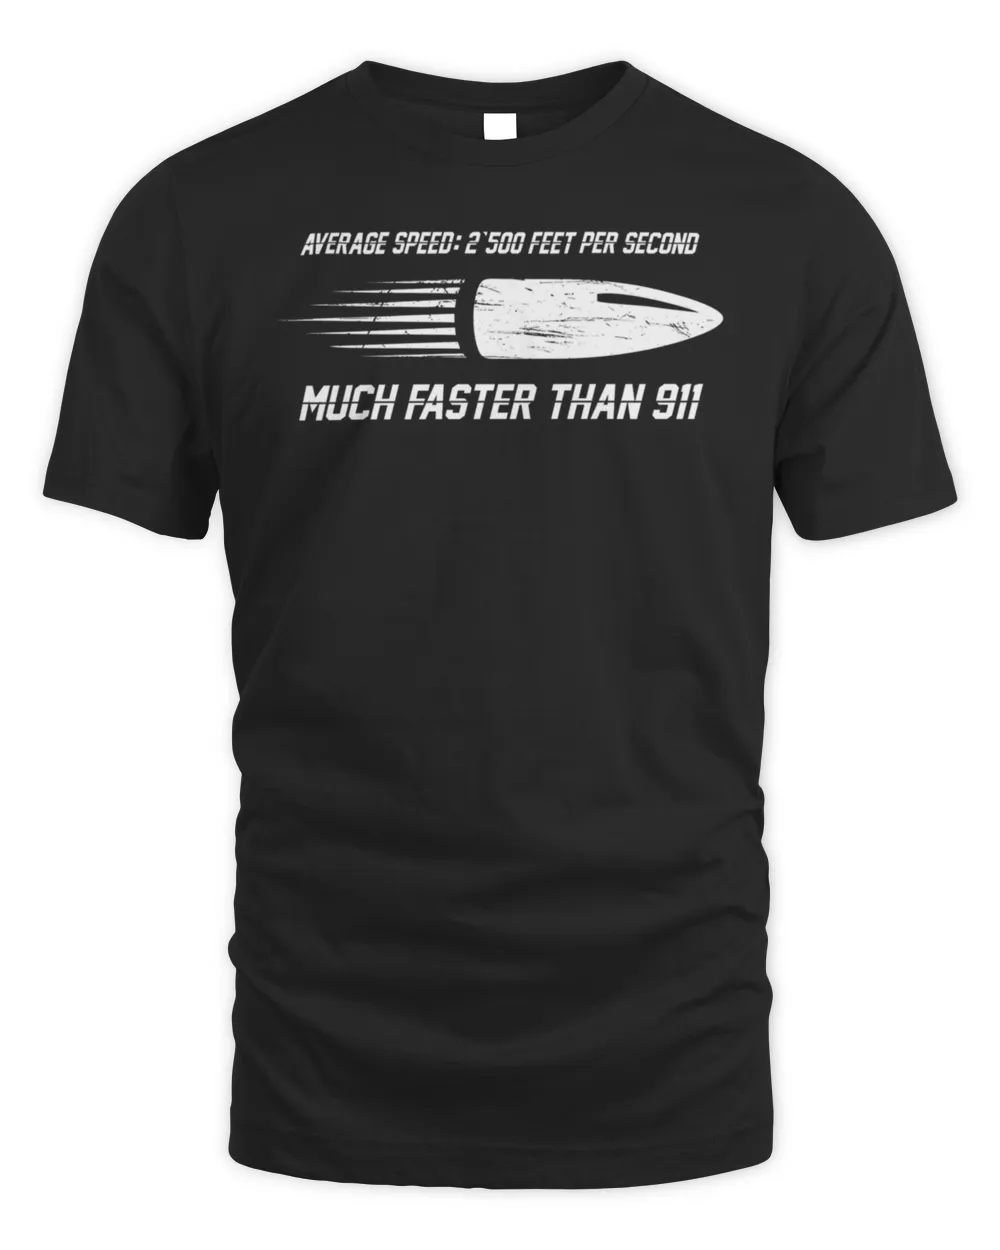 Much faster than 911 - Average Speed 2500 Feet per Second Bullet T-Shirt